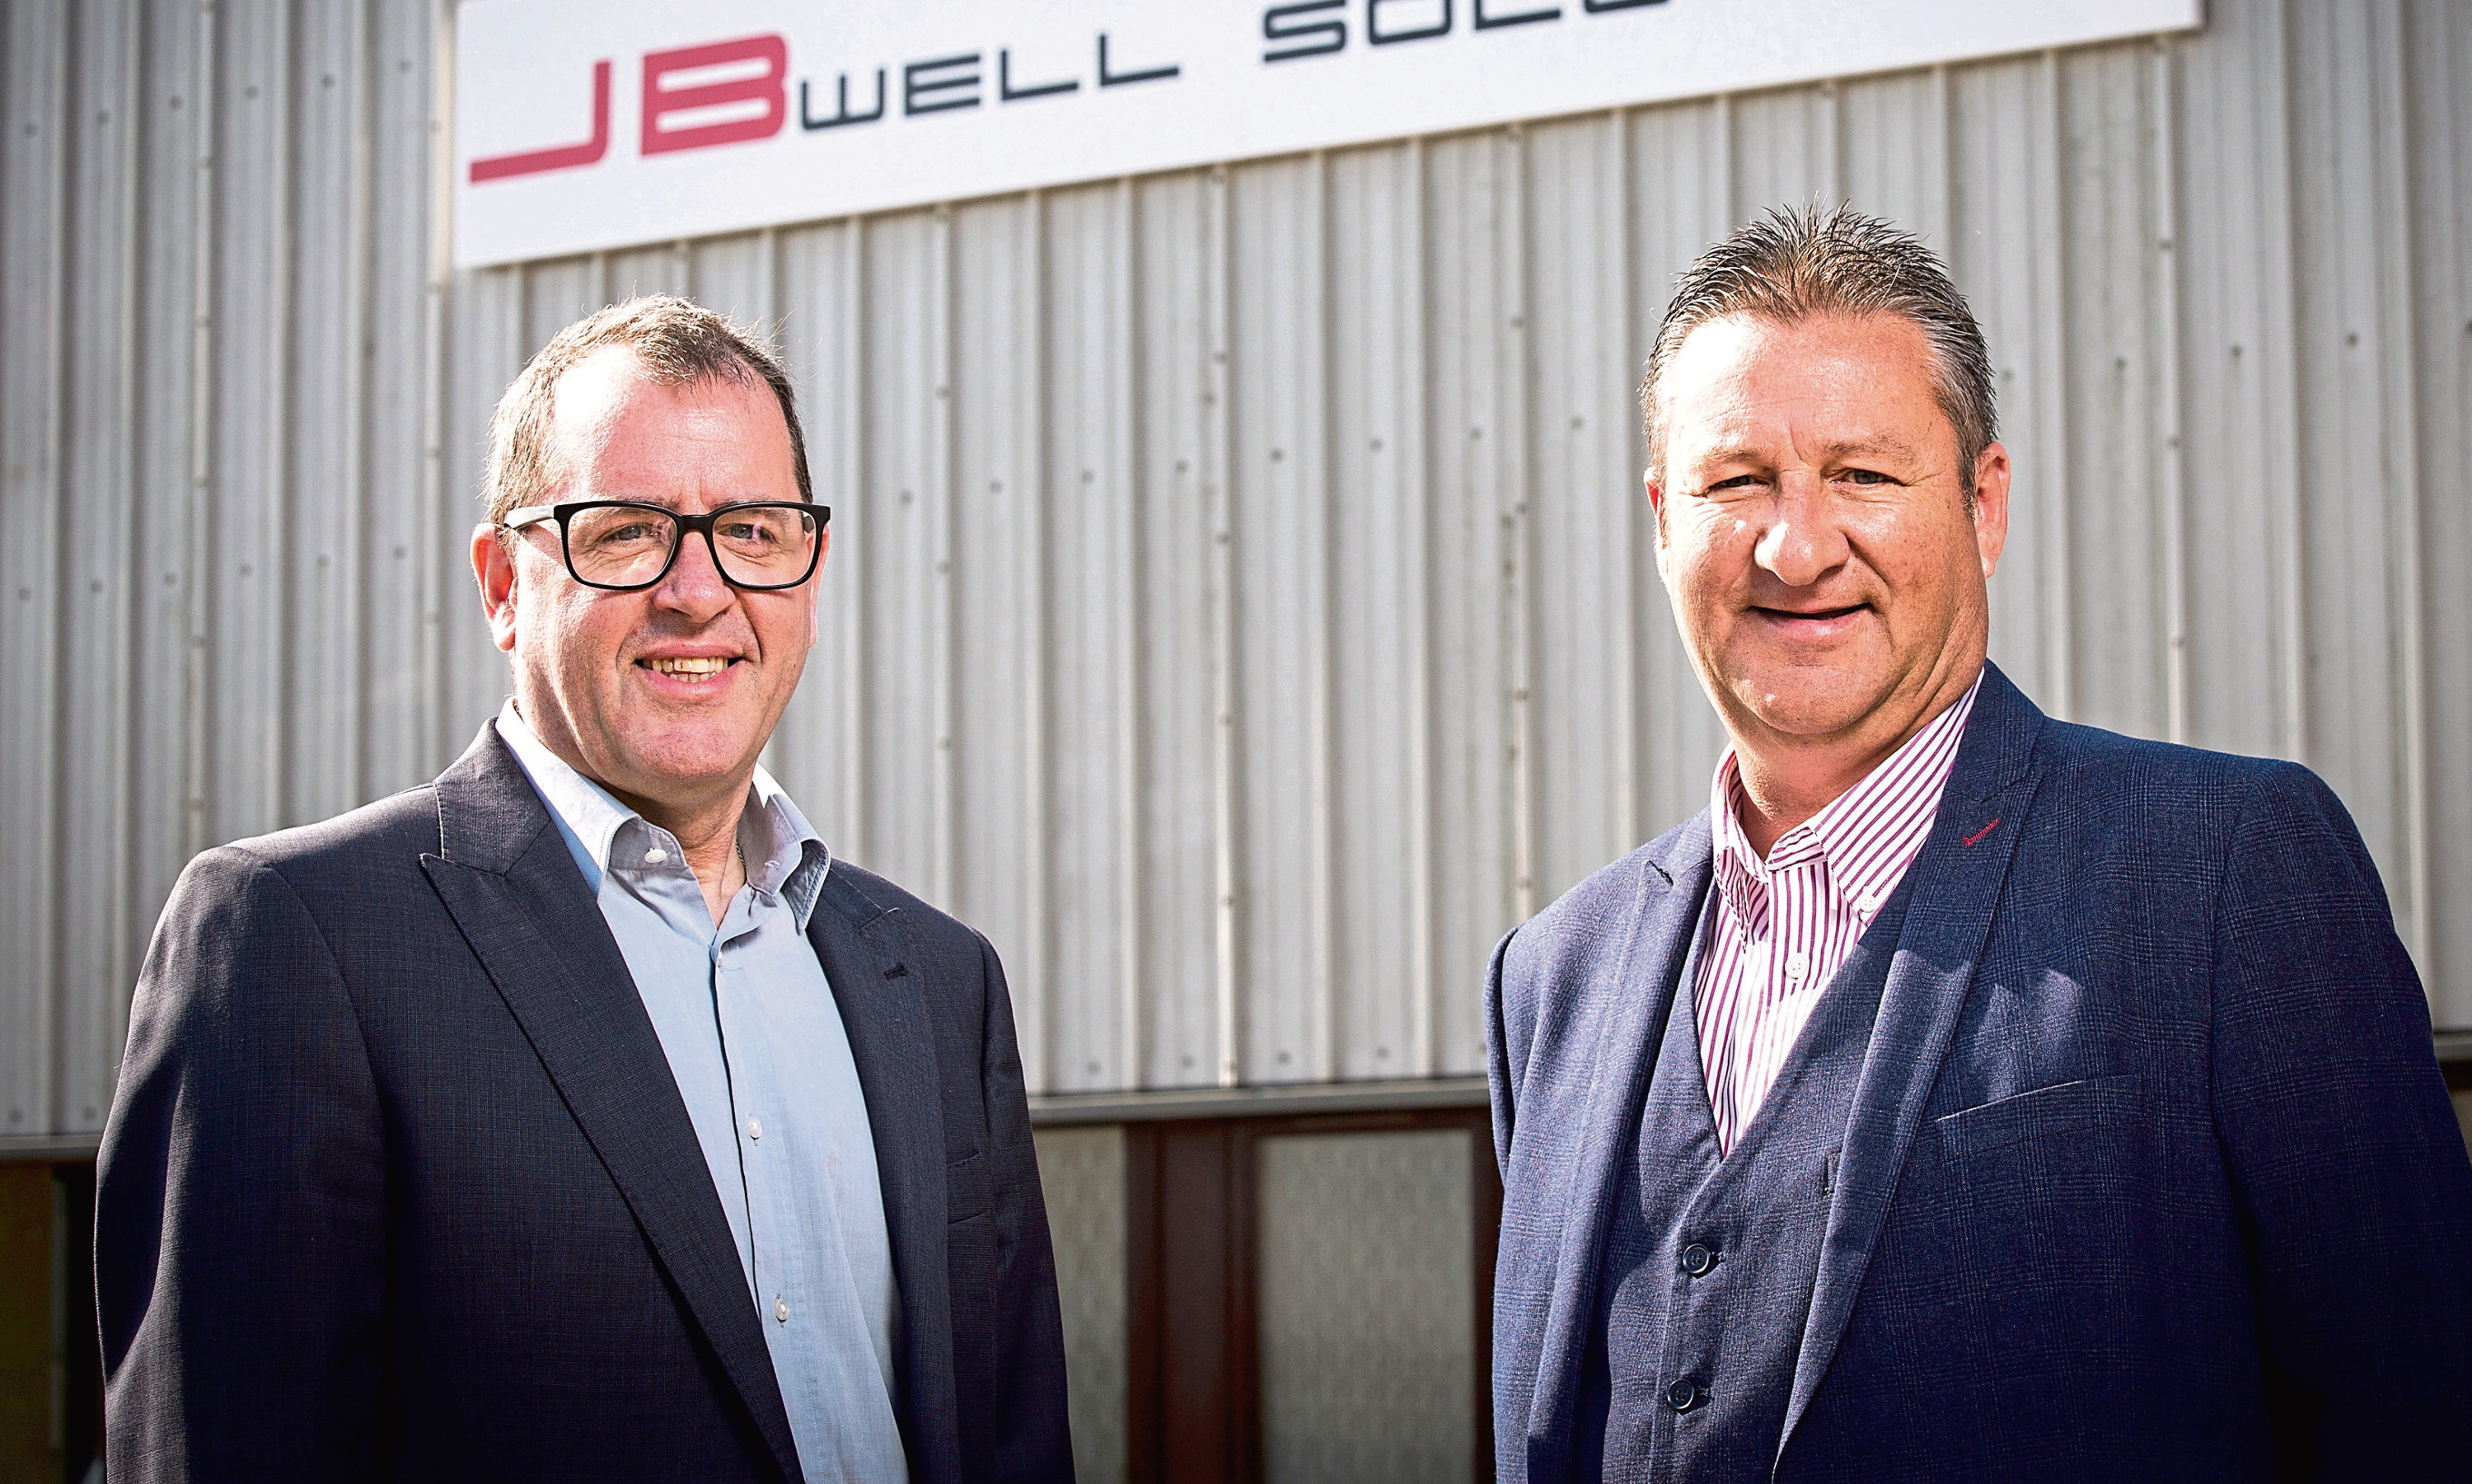 Local businessmen Robbie Garden, left, and Robbie Gray outside the JB Well Solutions headquarters